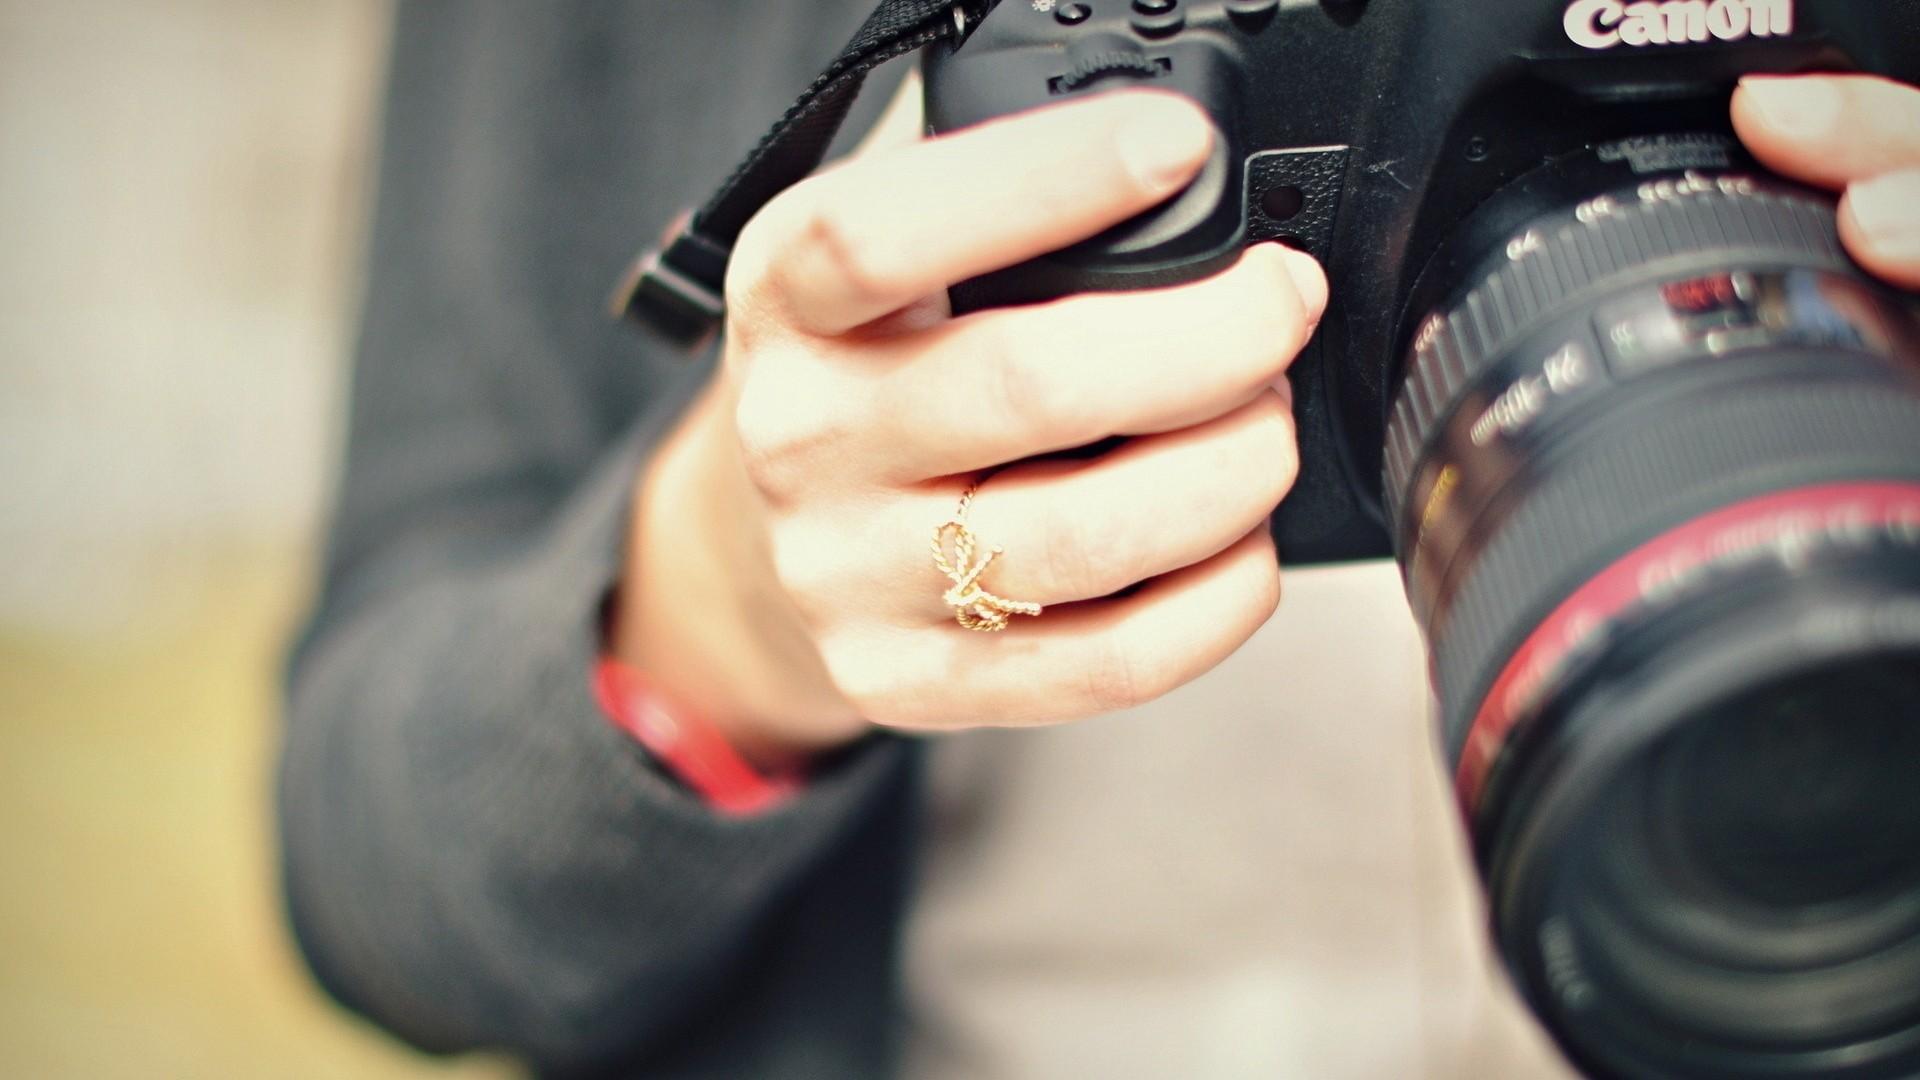 Download 1920x1080 Photographer Girl, Camera, Ring, Hands